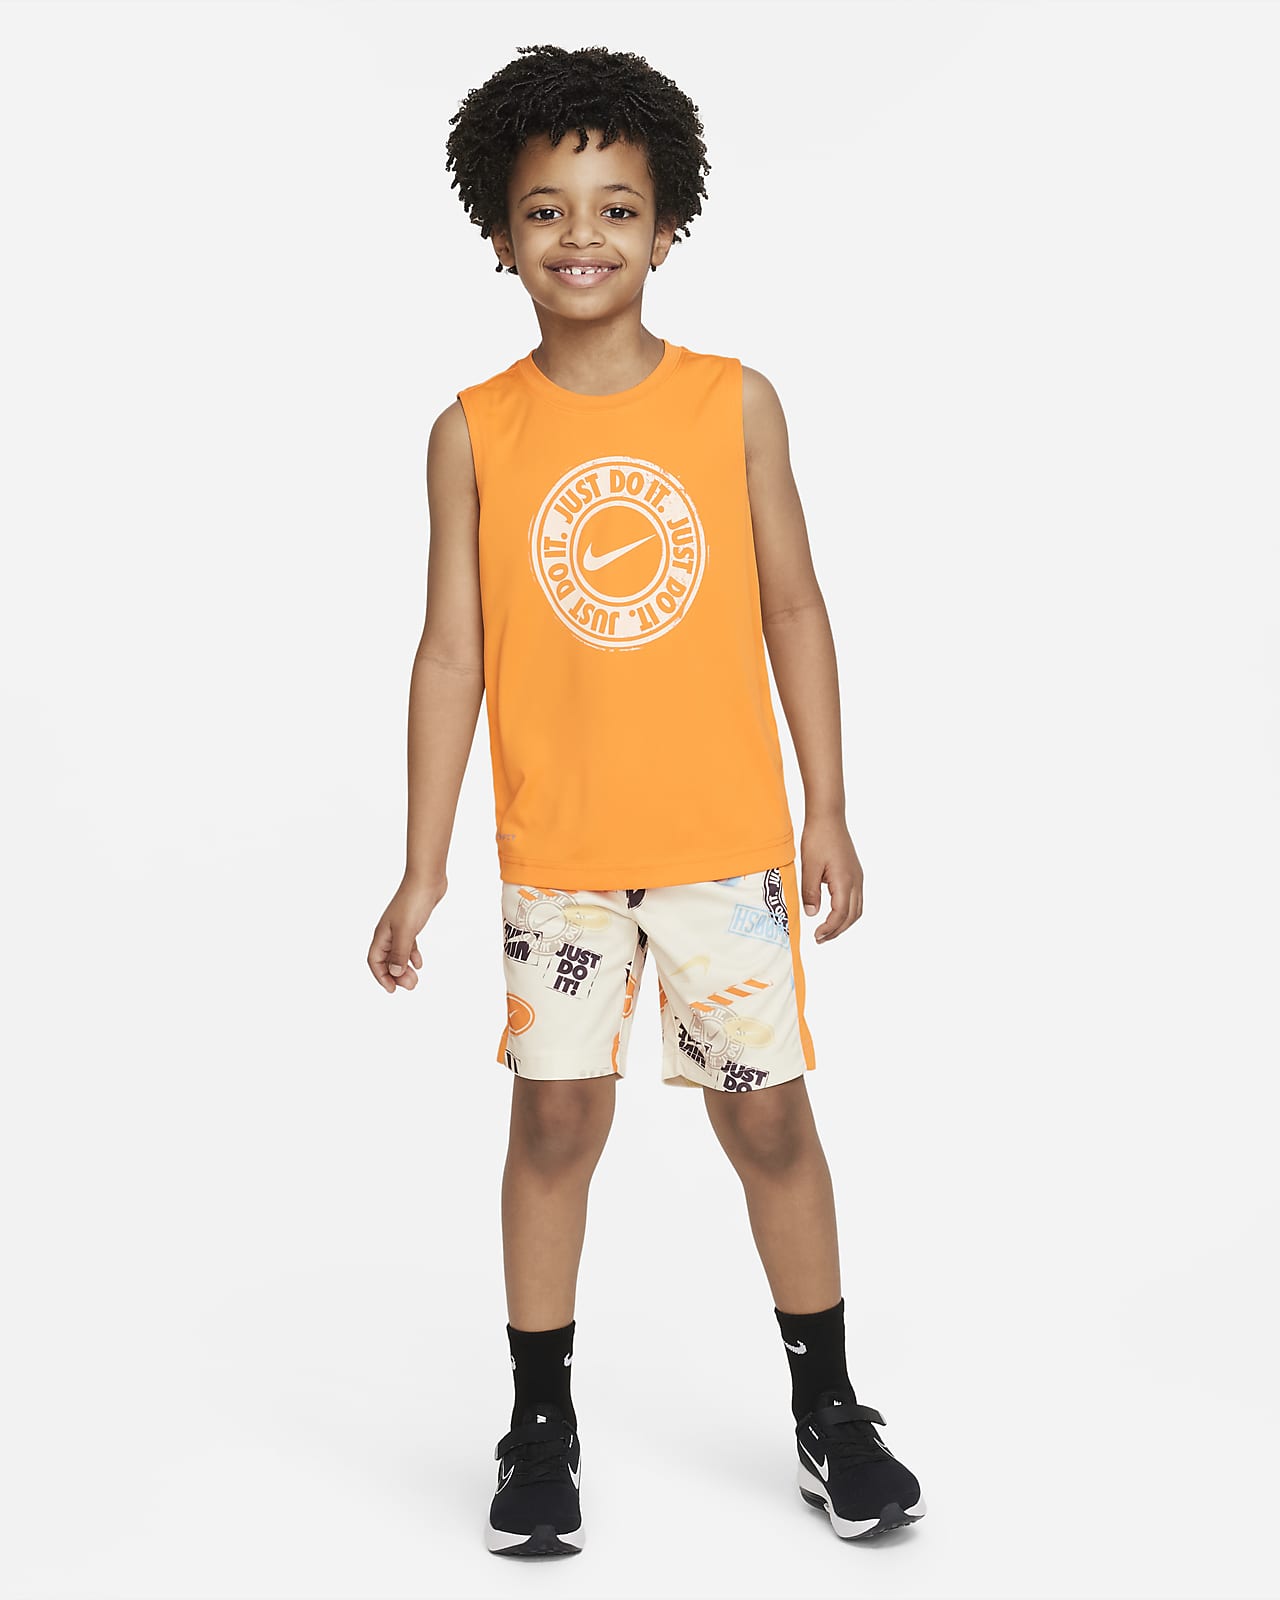 Nike Wild Air Muscle Tank and Shorts Set Little Kids' 2-Piece Set